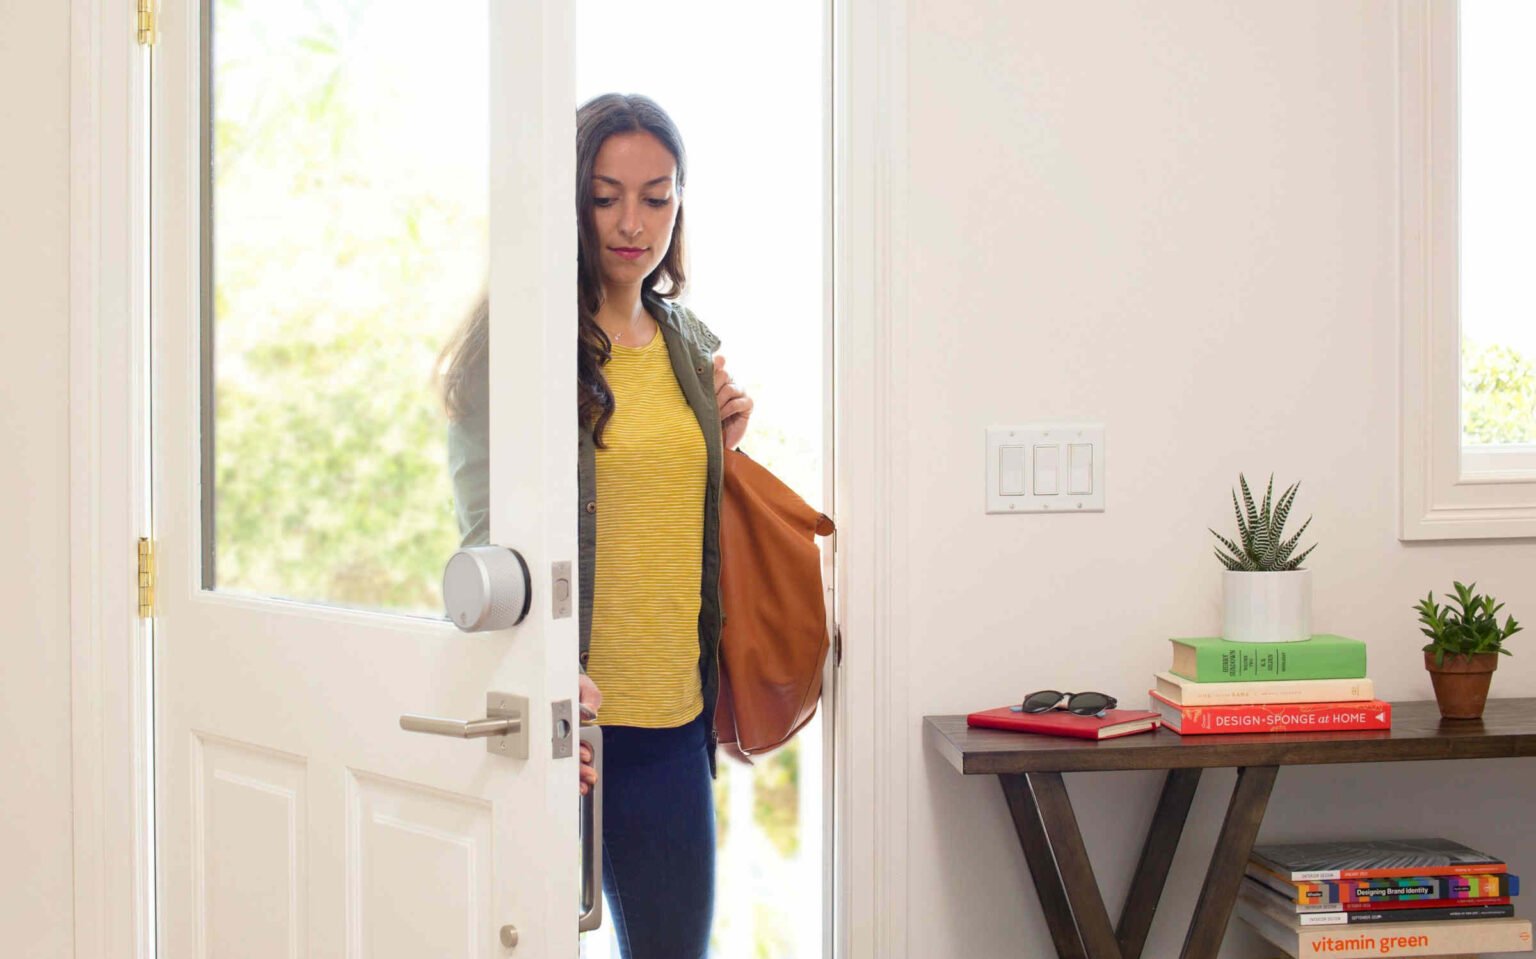 Whether or not you're home, protect your space at all times when you use these tips to find the best OLED module for your digital smart locks!